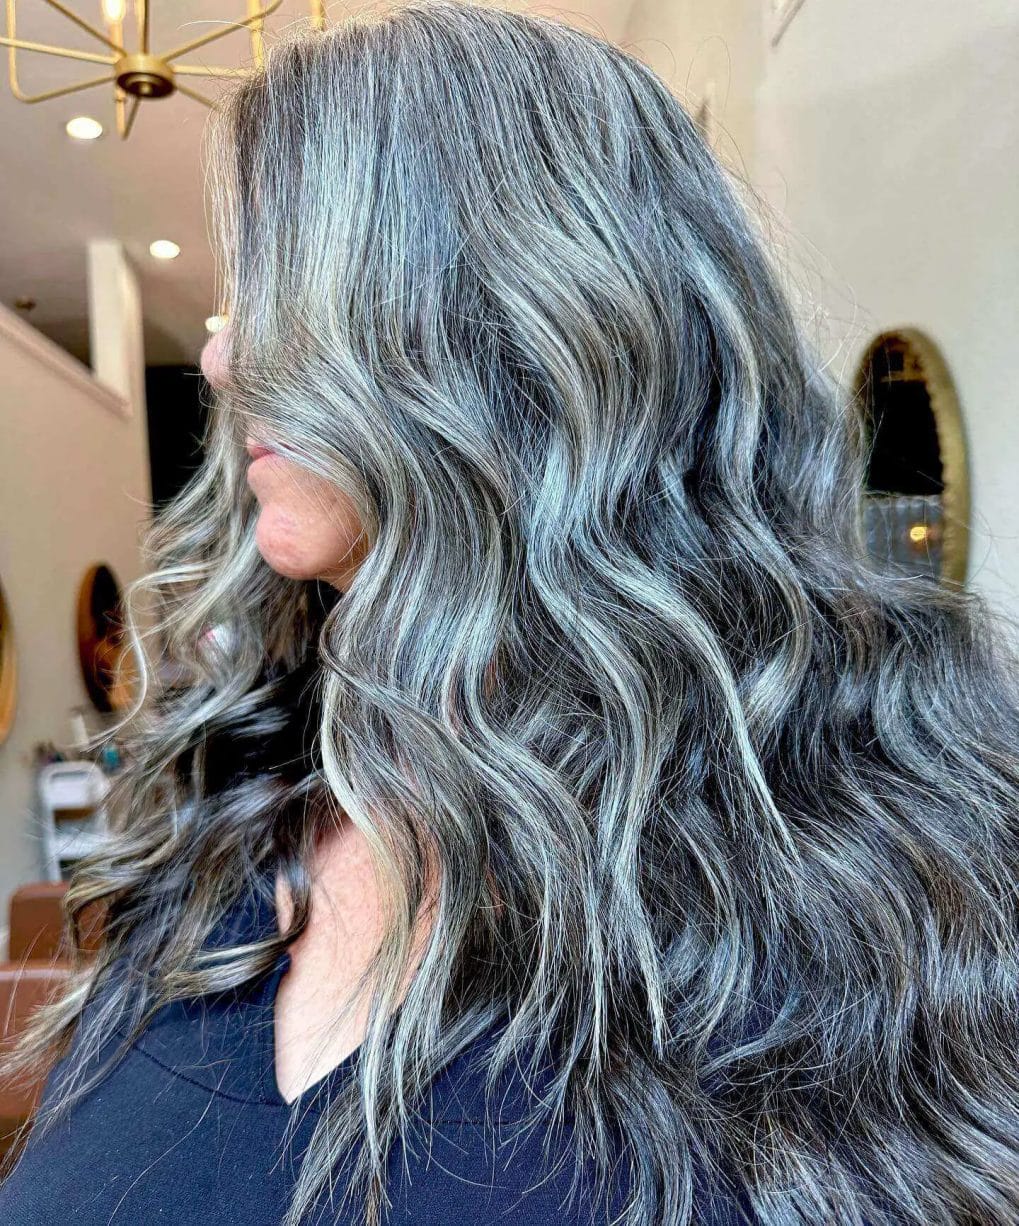 Full-bodied mane with textured waves in silver and ash balayage.